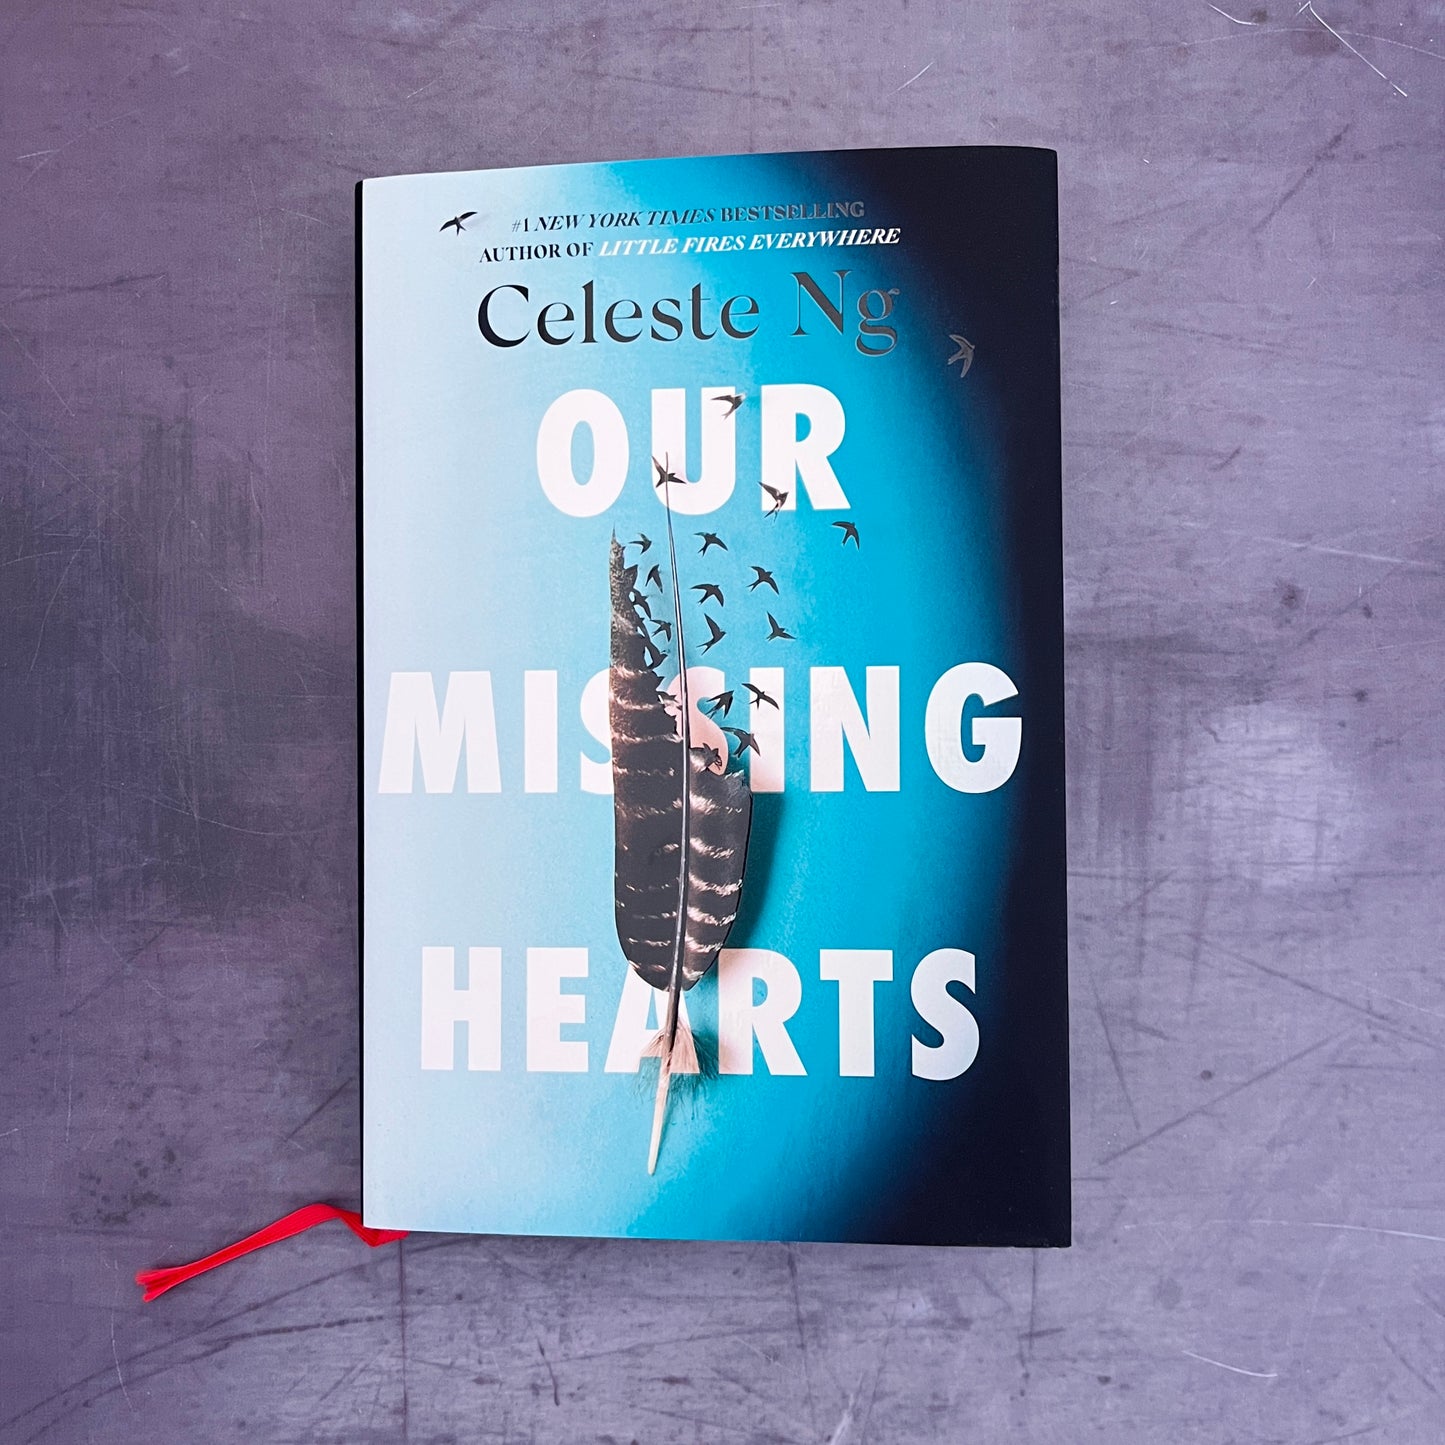 'currently reading' : Our Missing Hearts by Celeste Ng